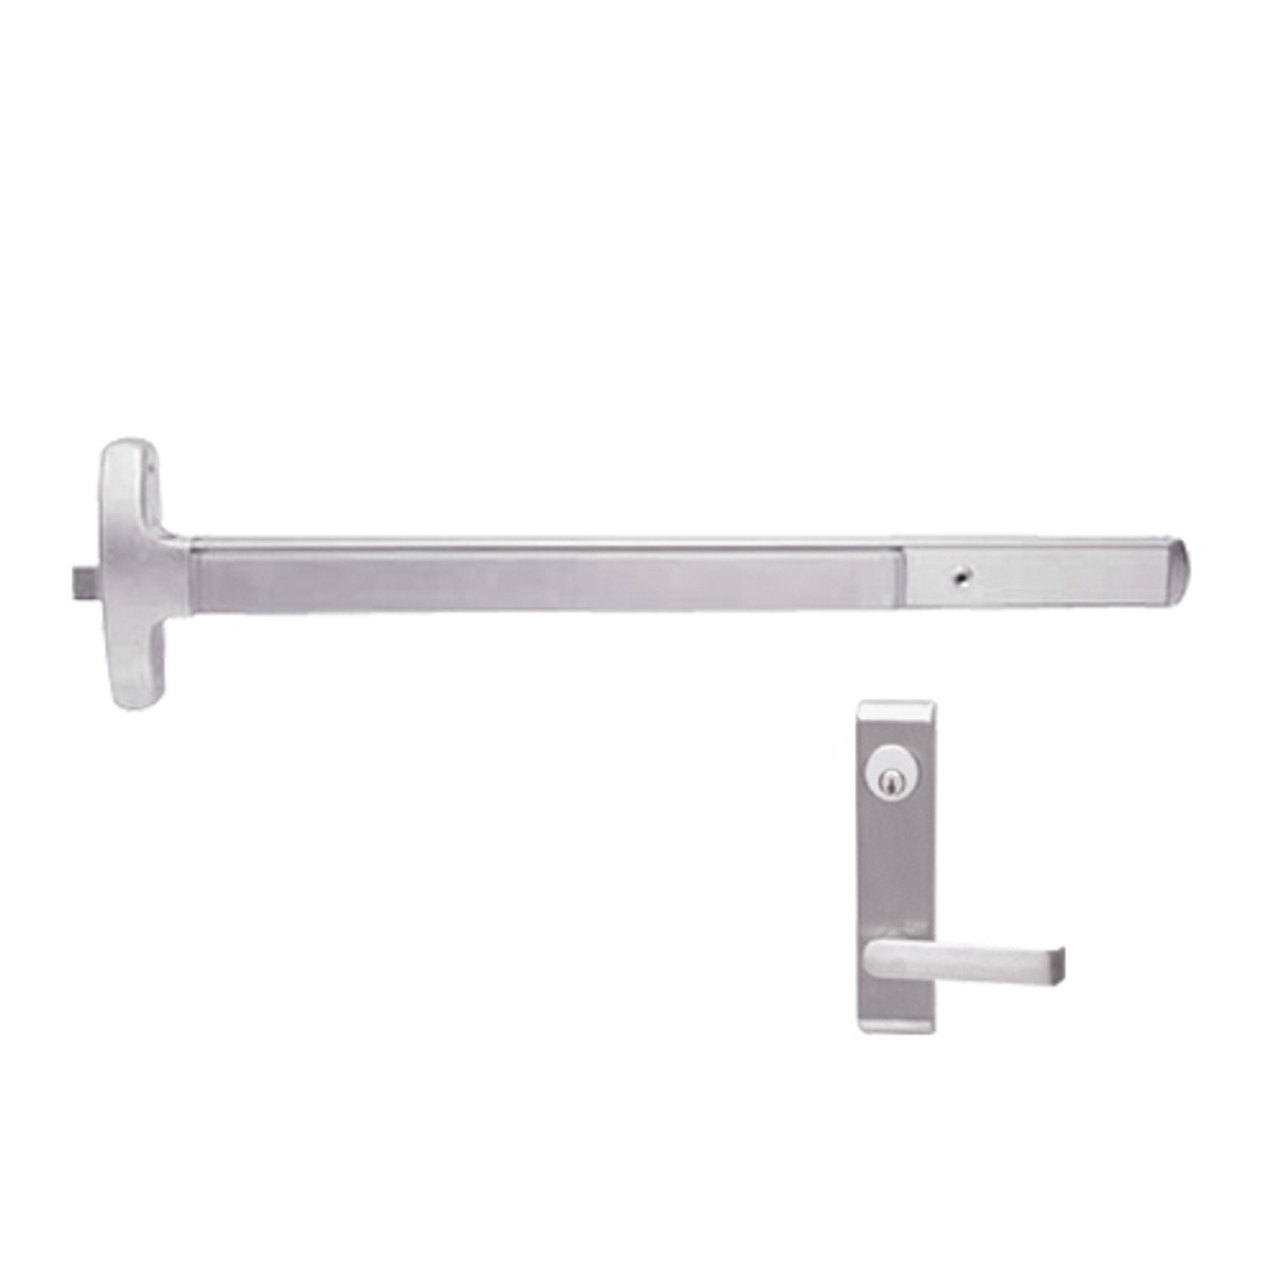 24-R-L-NL-DANE-US32-3-LHR Falcon Exit Device in Polished Stainless Steel